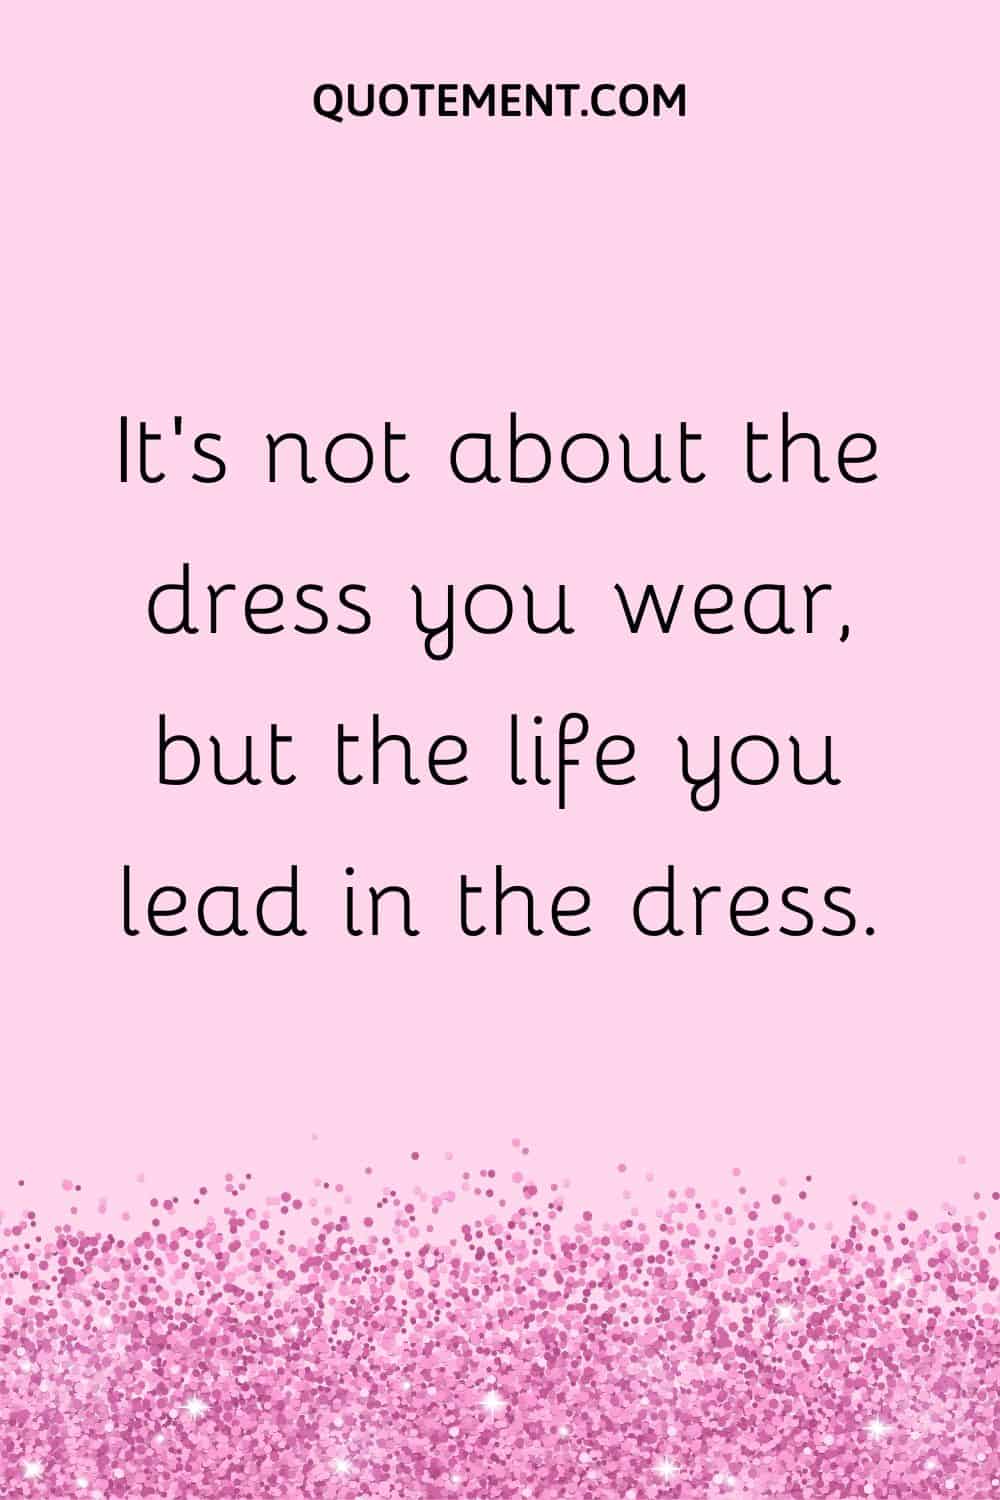 It’s not about the dress you wear,